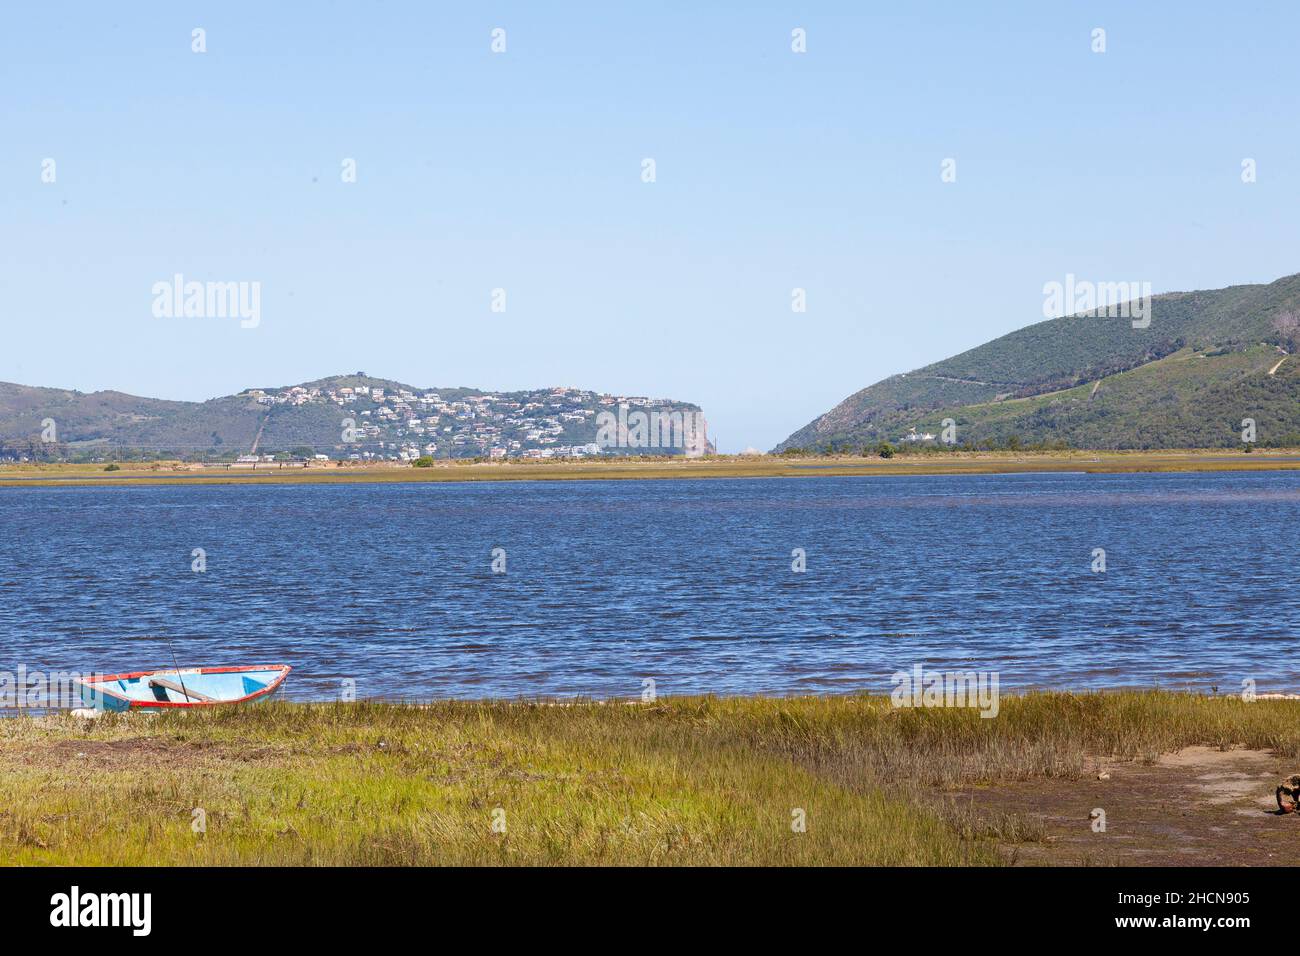 View over the Knysna Lagoon of the popular tourist town of Knysna, Garden Route, Western Cape, South Africa with The Heads Stock Photo